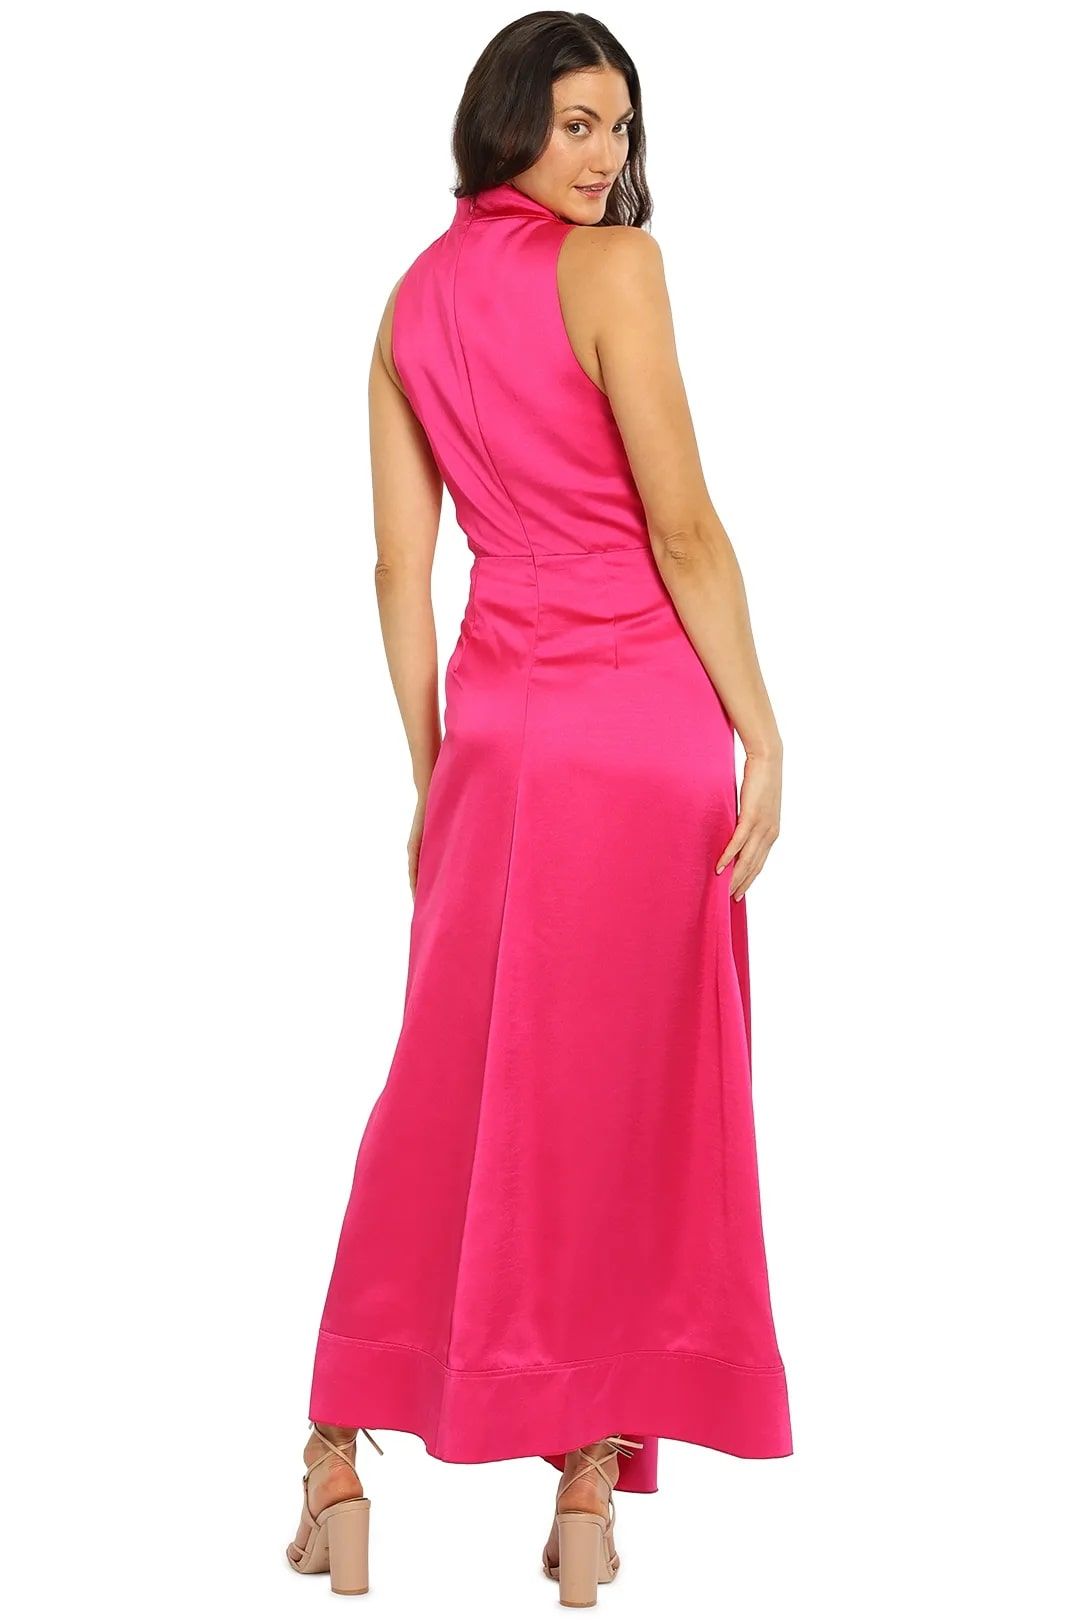 Palmera dress in pink for daytime events.